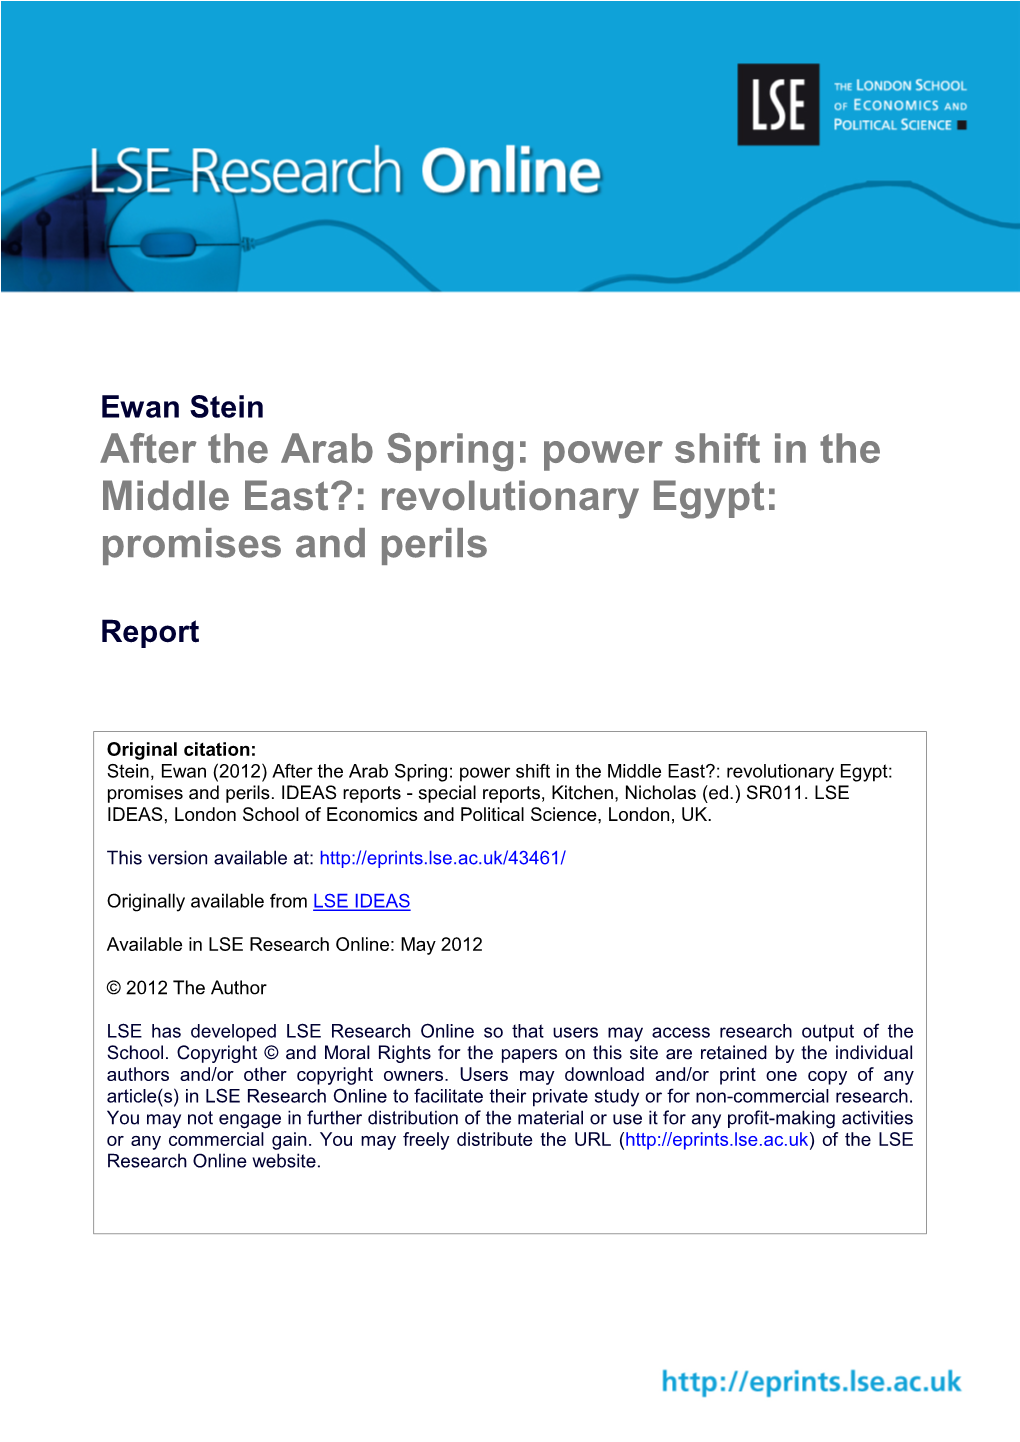 After the Arab Spring: Power Shift in the Middle East?: Revolutionary Egypt: Promises and Perils